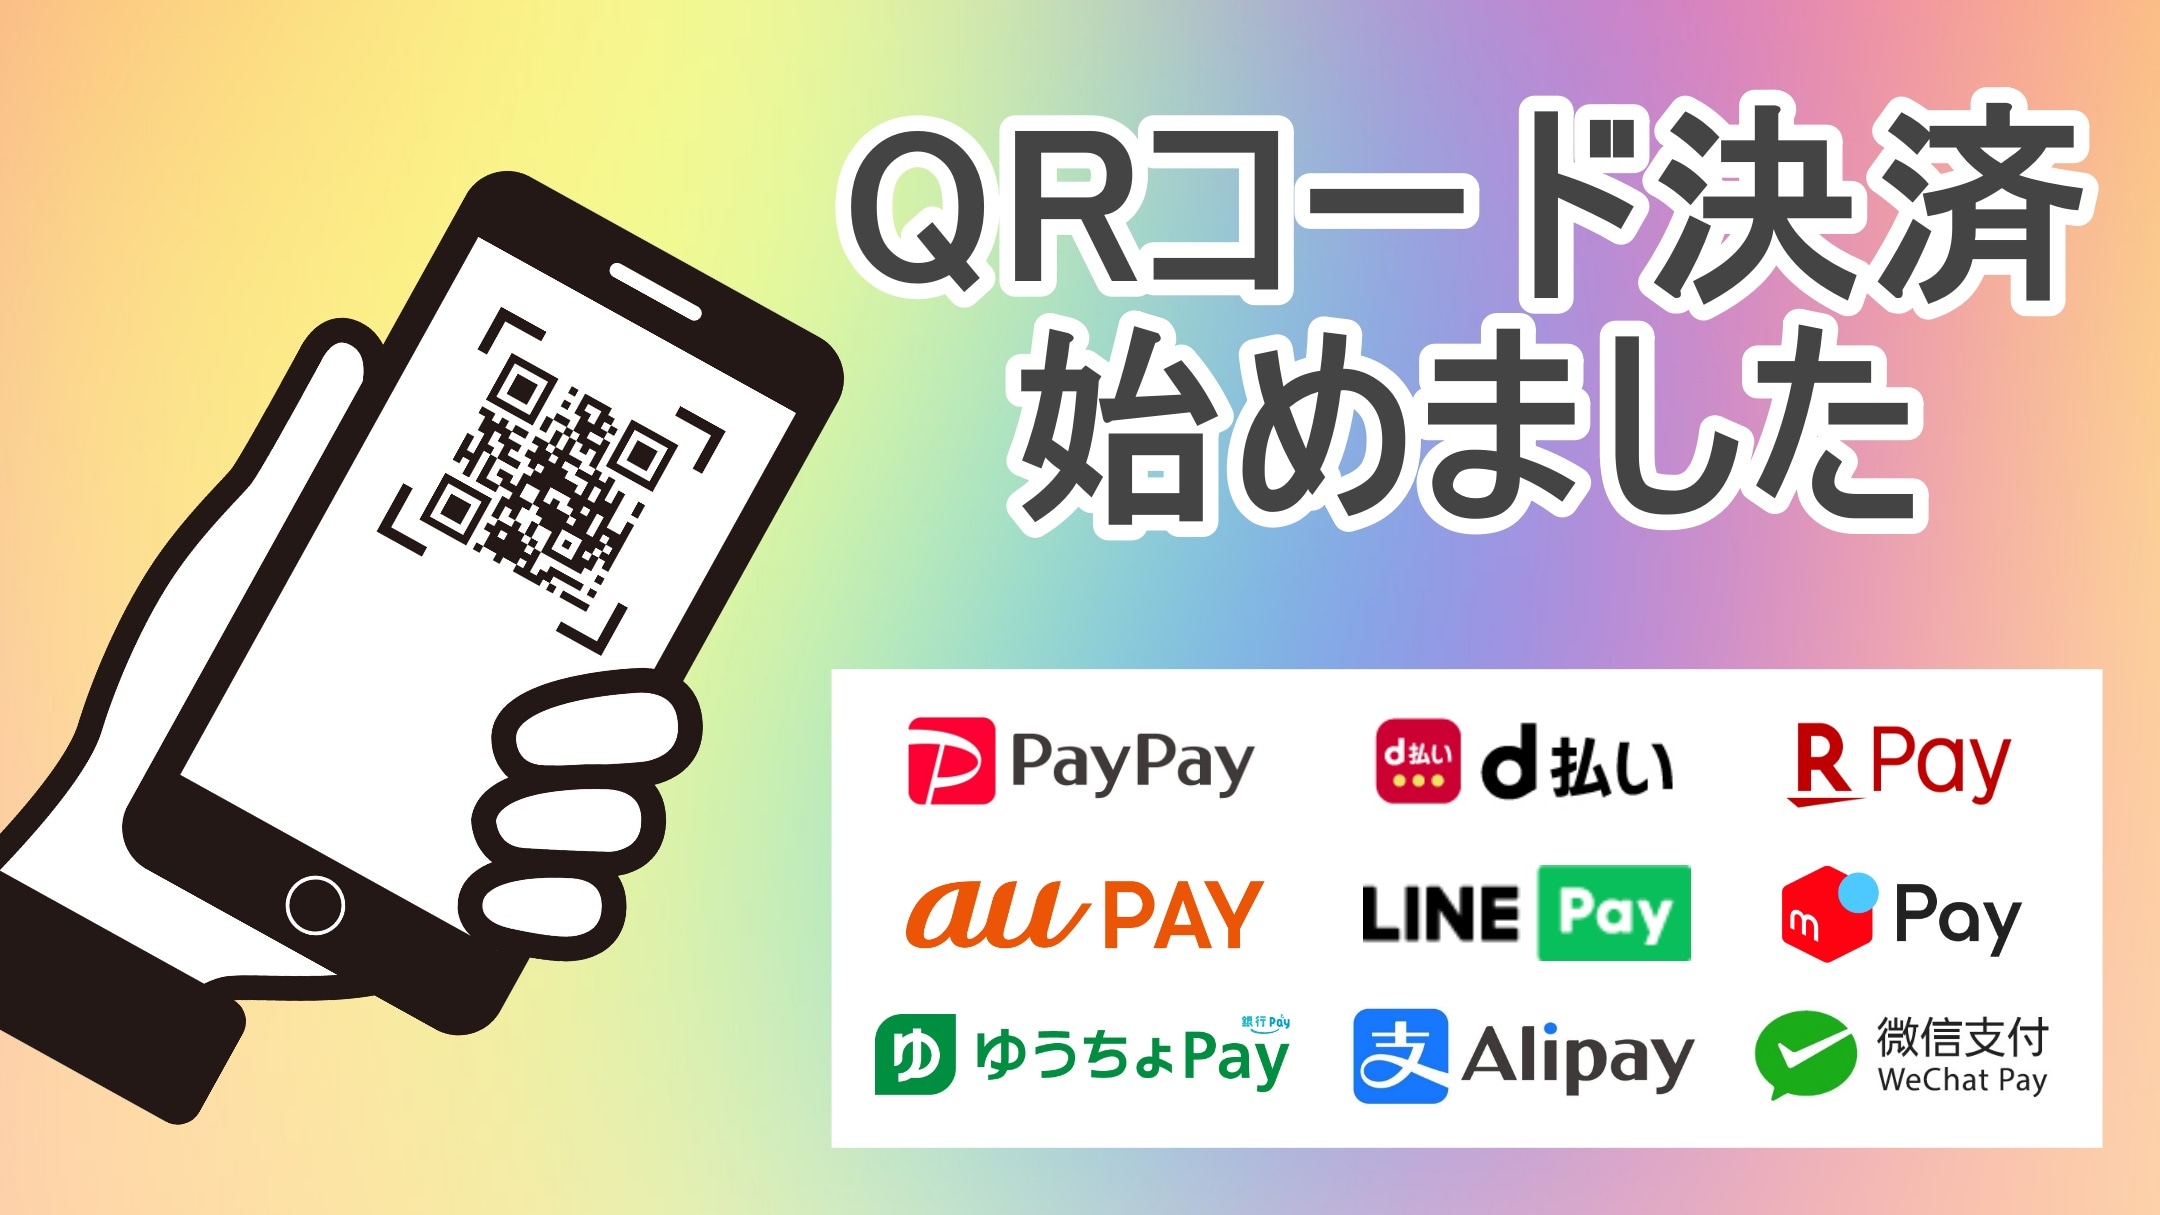 QR payment is now possible.